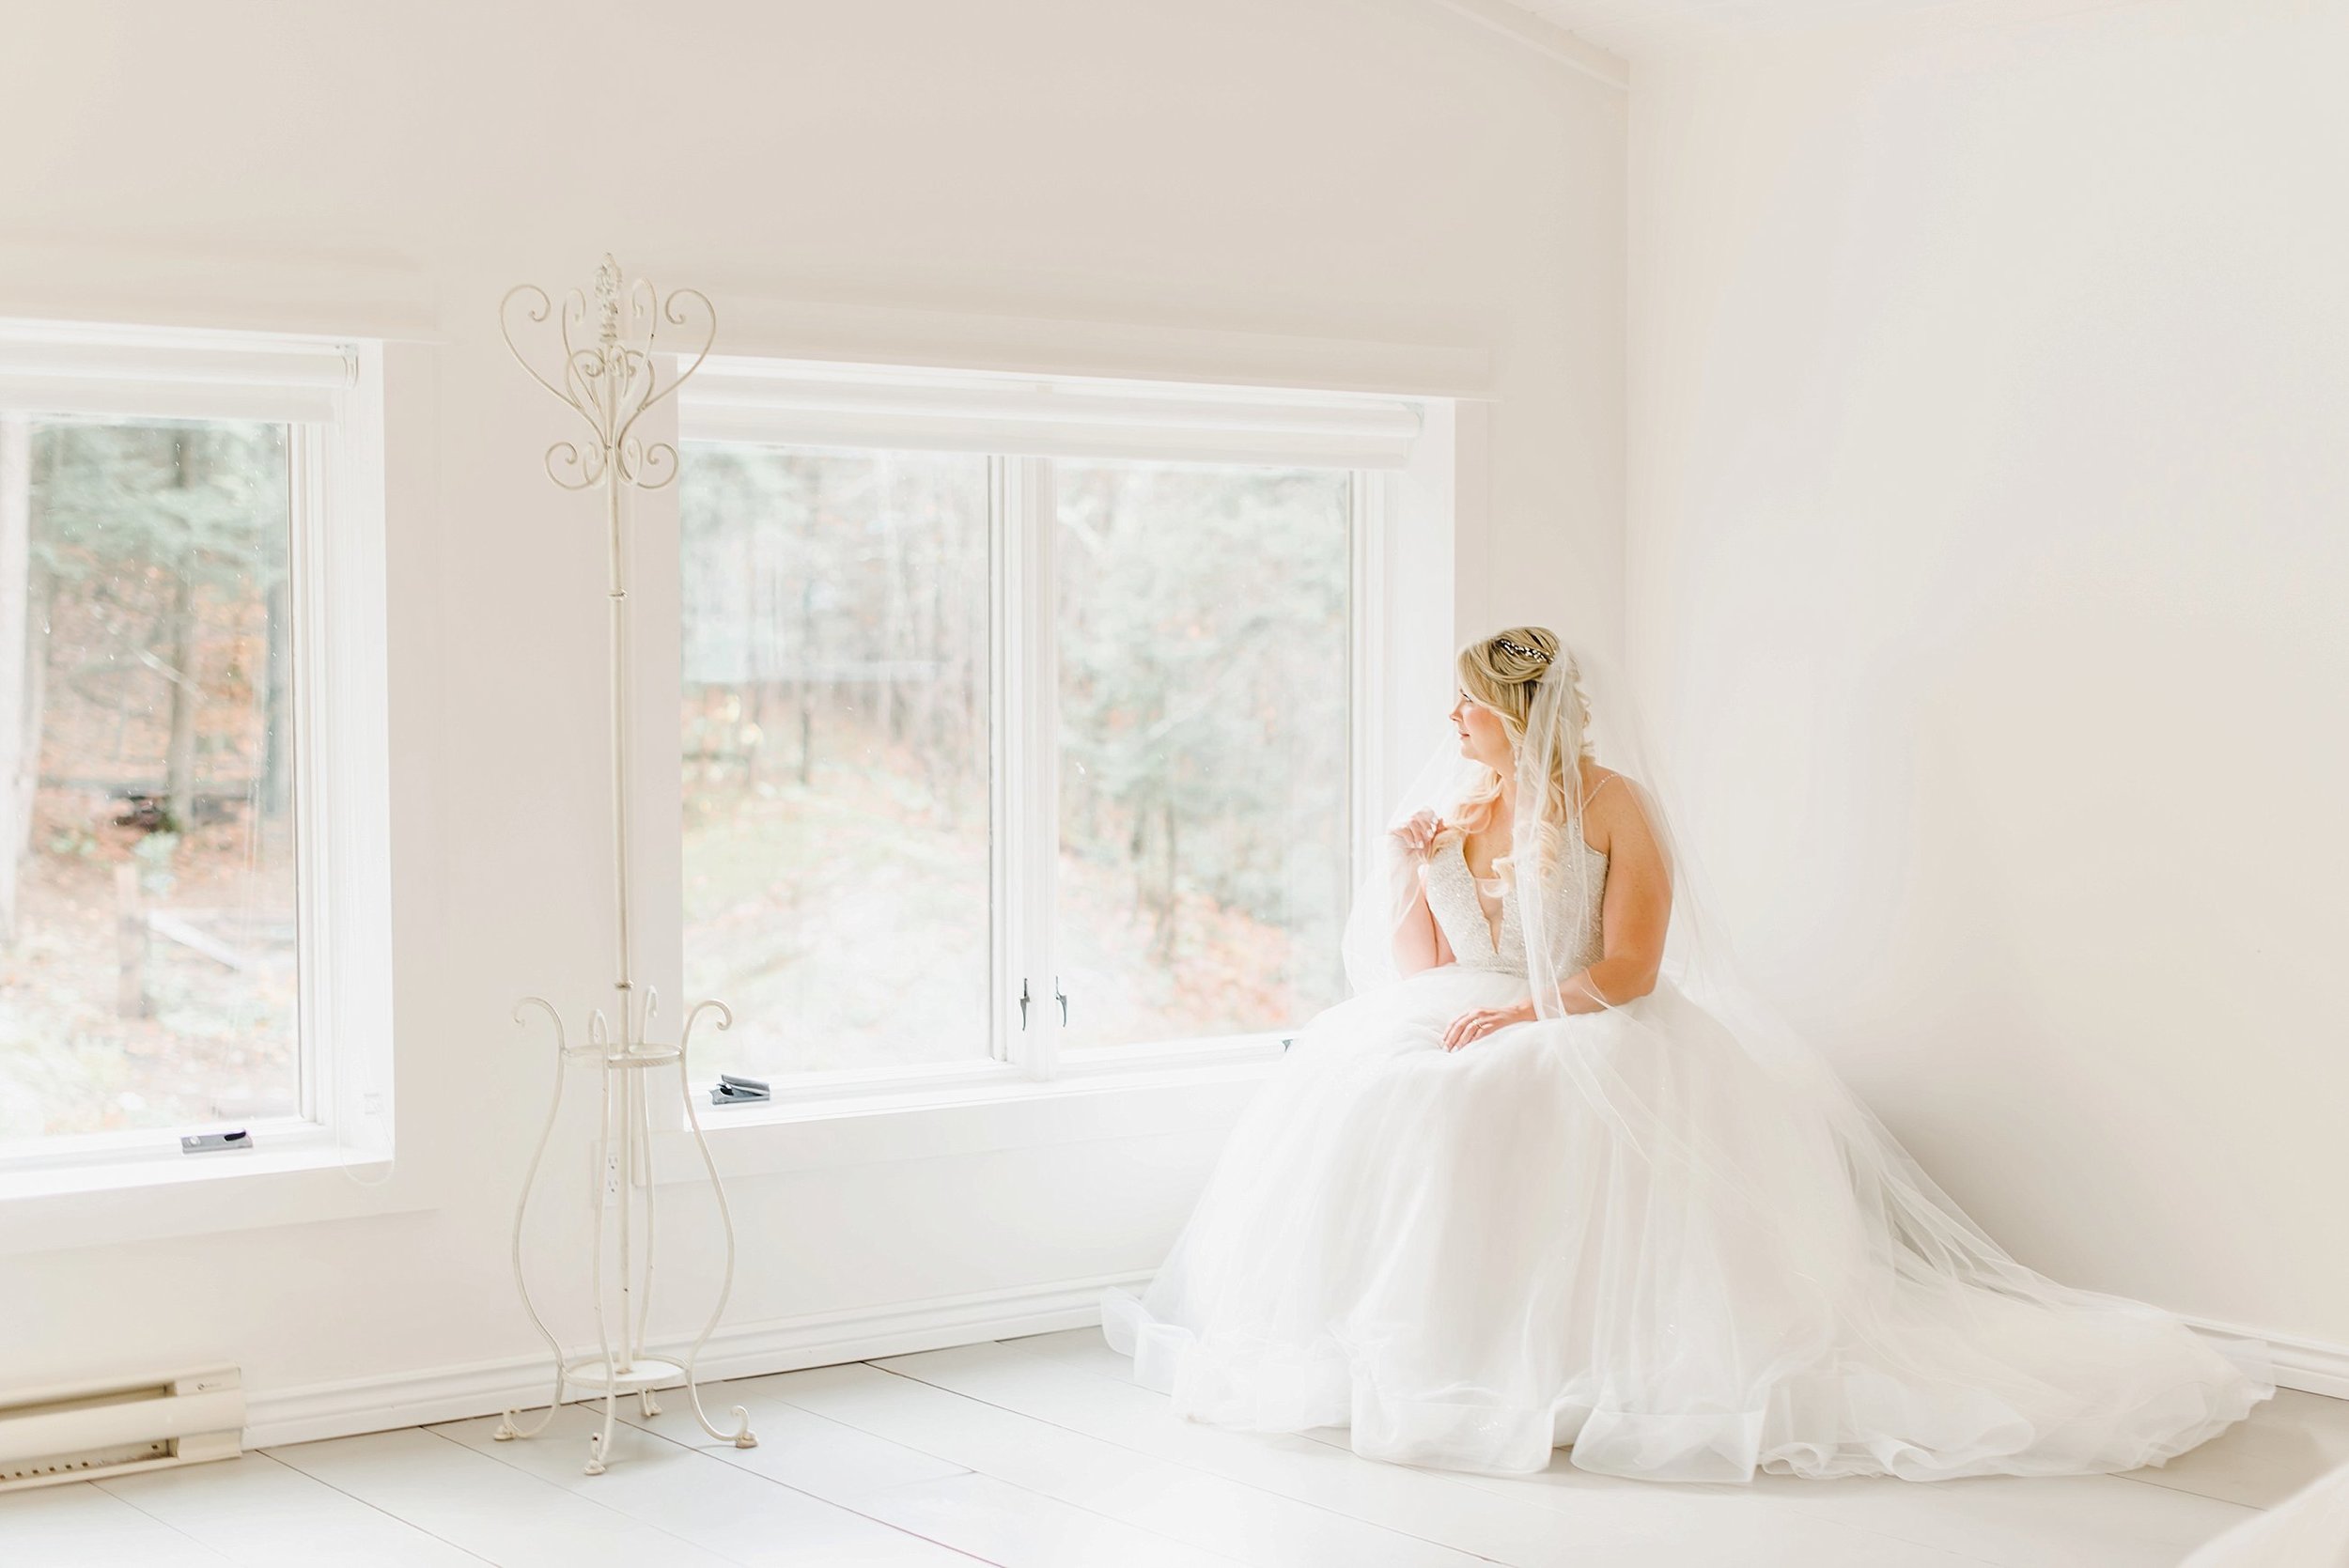  The brightest, airiest room for the most beautiful bride! 